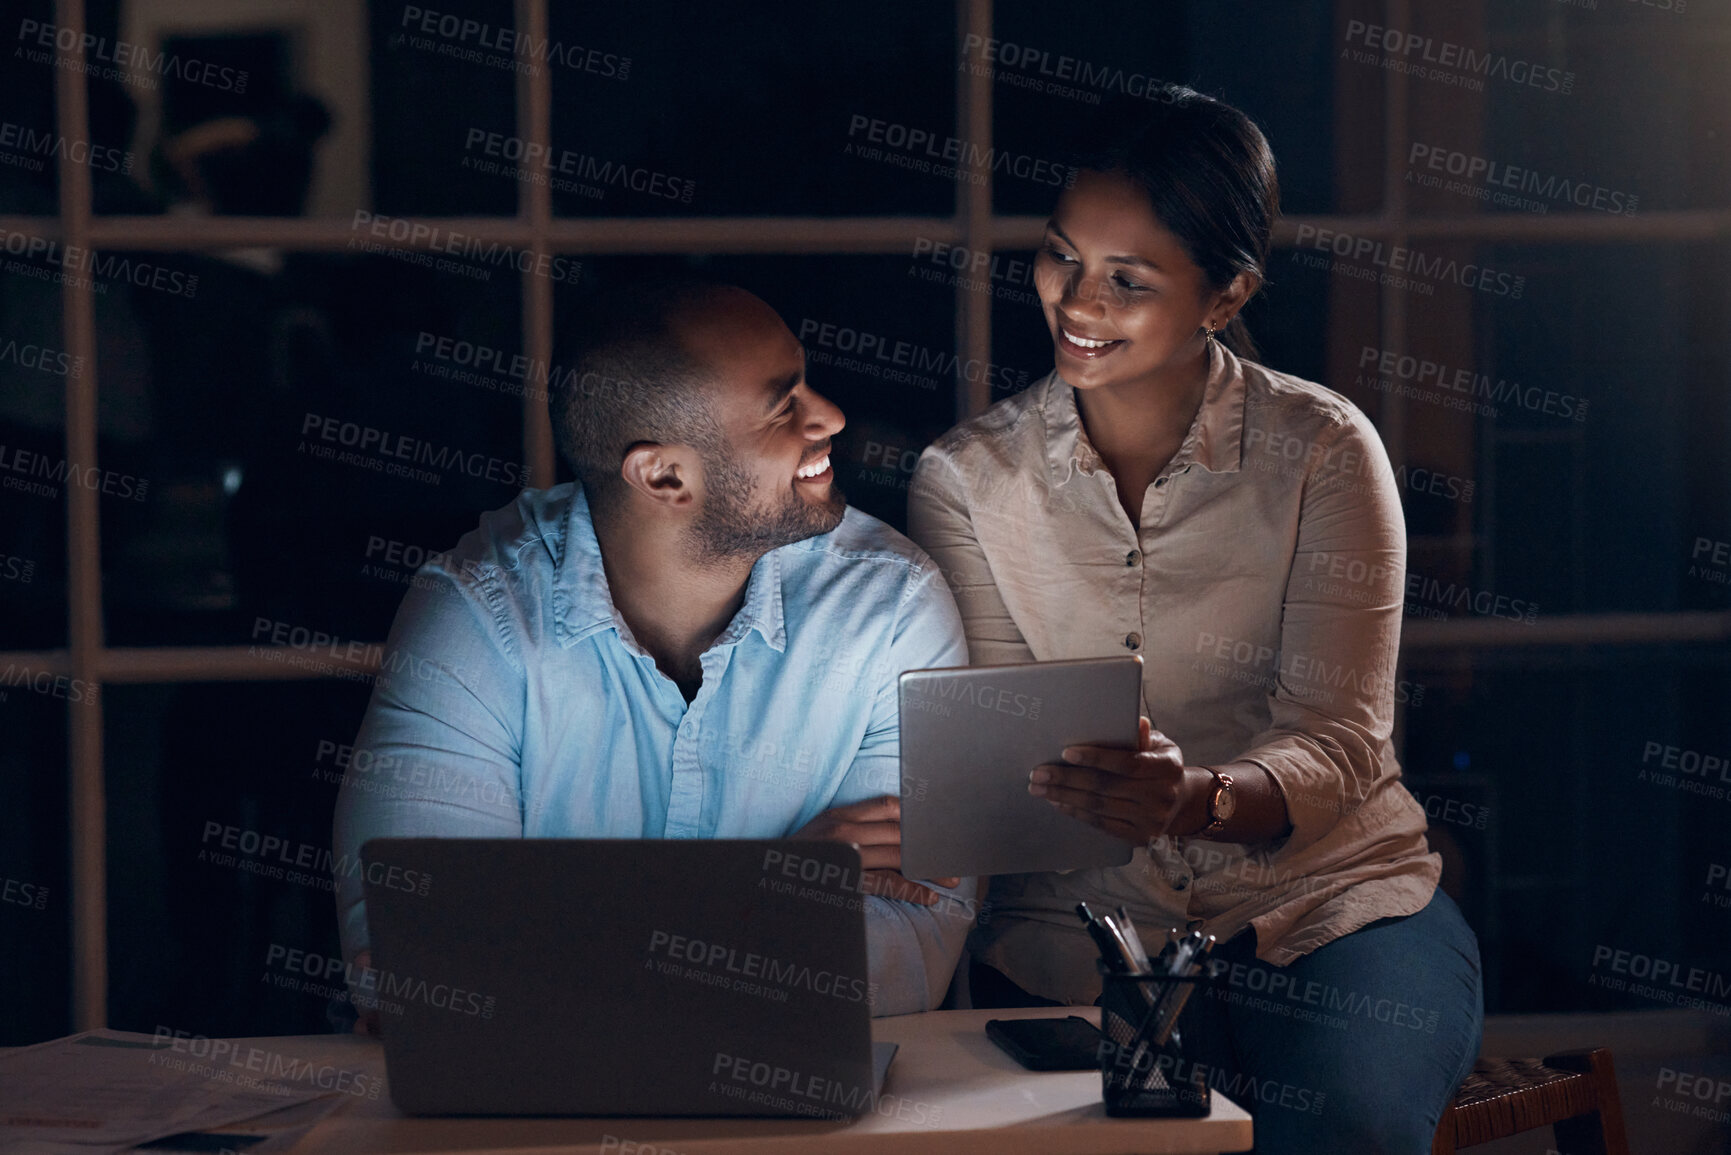 Buy stock photo Shot of a young couple using a digital tablet together at night